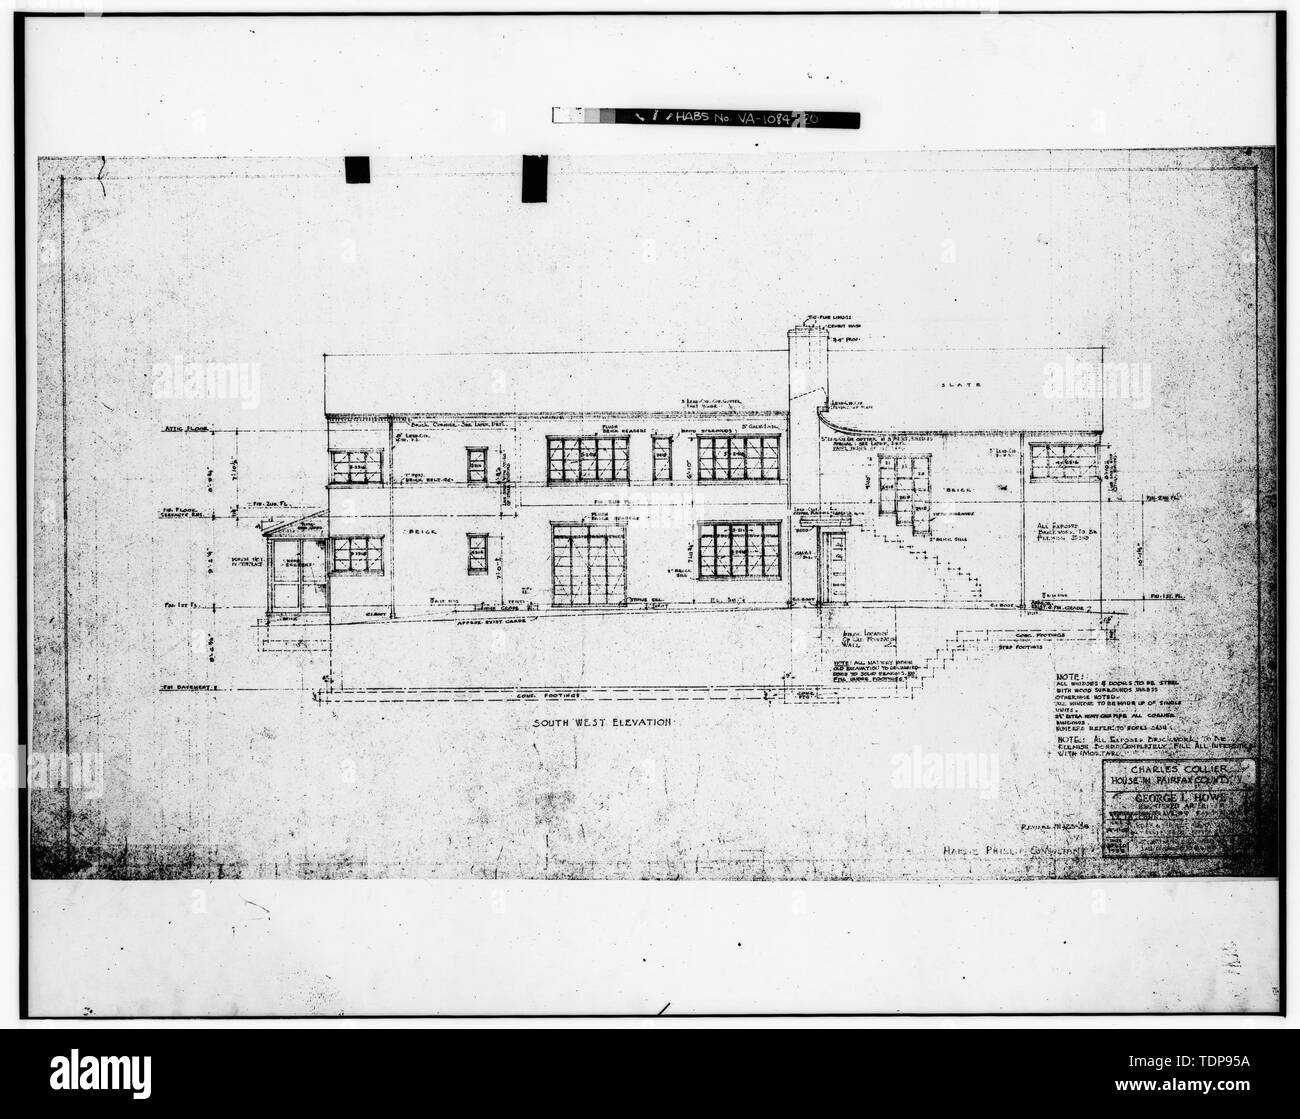 Photocopy of blackline print in possession of Mrs. William L. Reno. Original drawing by George Locke Howe, Architect 1938. 'SOUTH WEST ELEVATION' - Mr. and Mrs. Charles Collier House, 6080 Leesburg Pike, Falls Church, Falls Church, VA; Howe, George Locke; Keily, Dan; Morris, Scott, transmitter Stock Photo